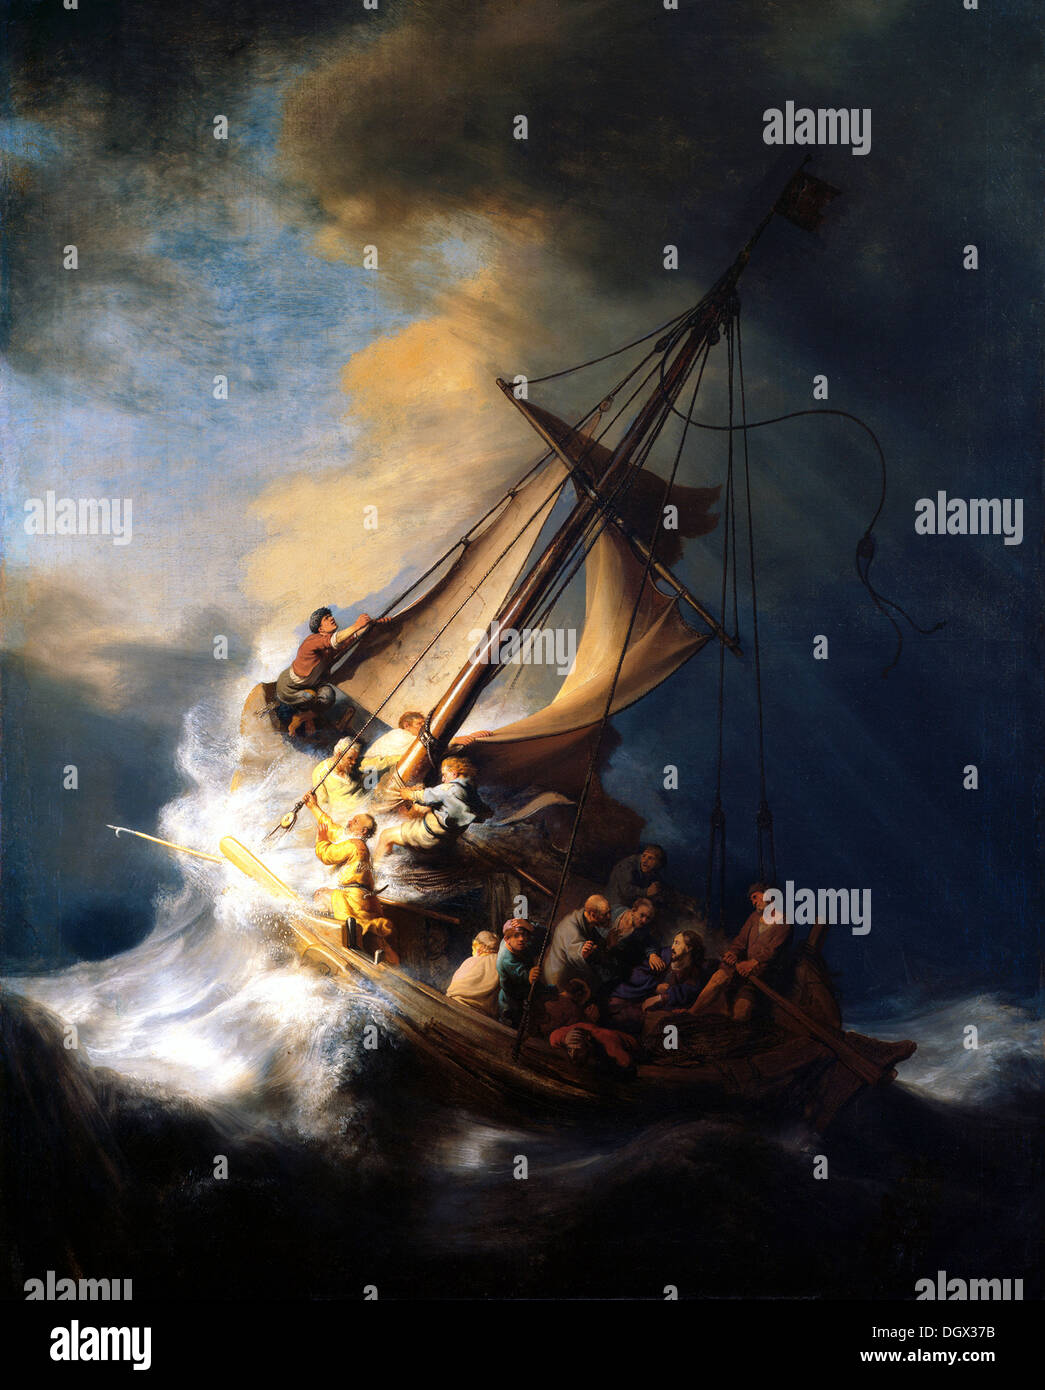 The Storm on the Sea of Galilee - by Rembrandt van Rijn, 1633 Stock Photo